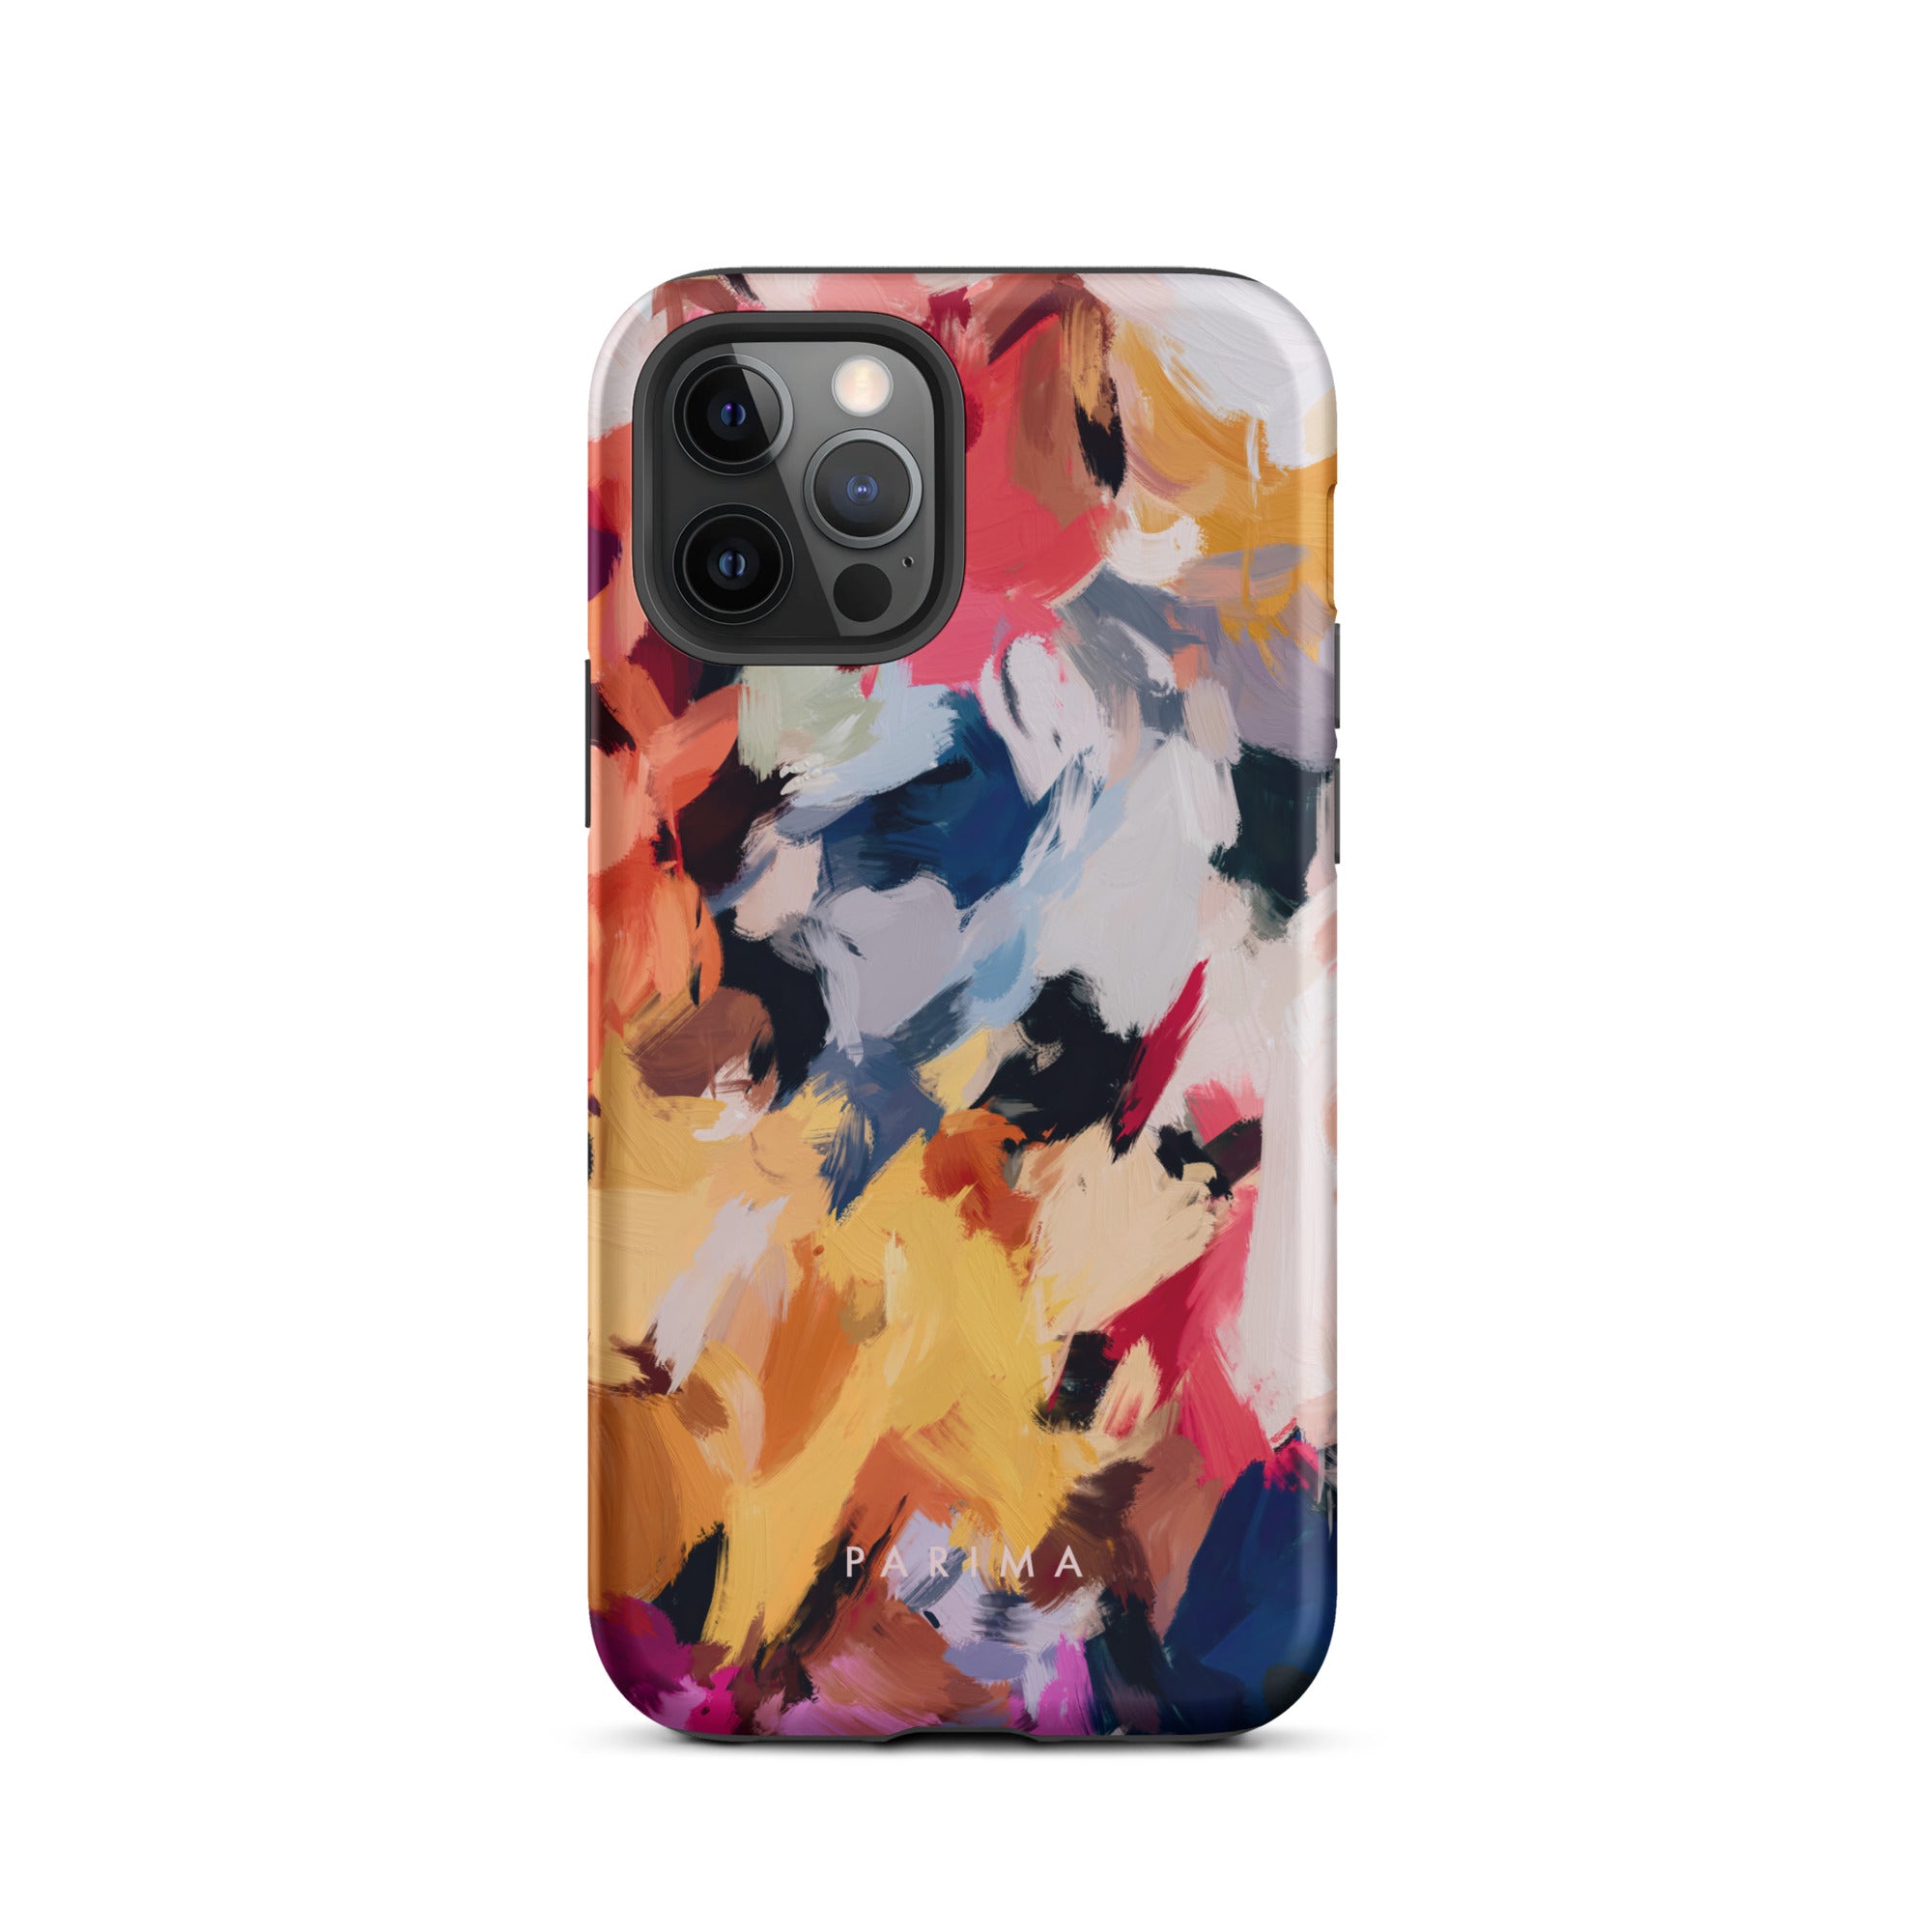 Wilde, blue and yellow abstract art on iPhone 12 Pro tough case by Parima Studio